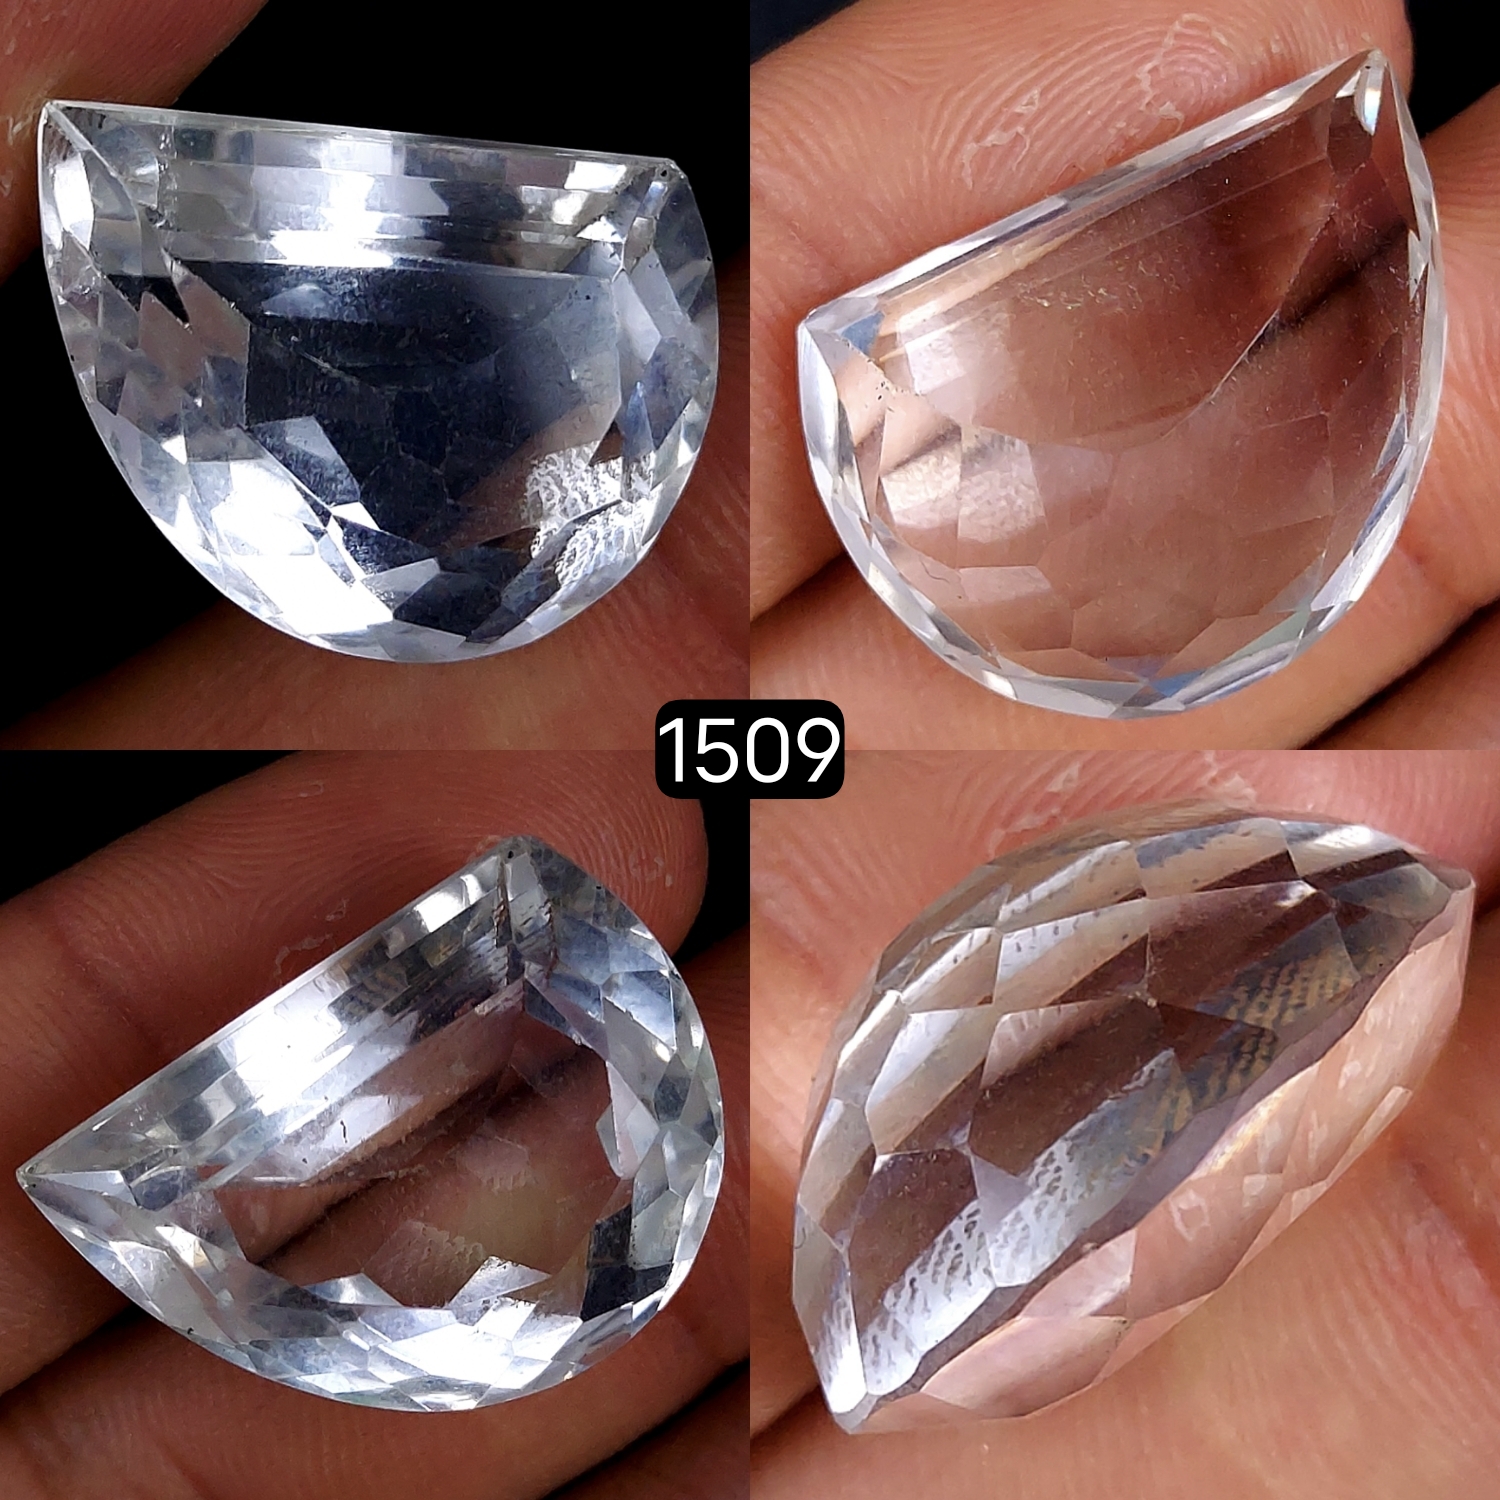 1Pcs 40Cts Natural Crystal Quartz Faceted Oval Shape Loose Gemstone 23x17mm#1509